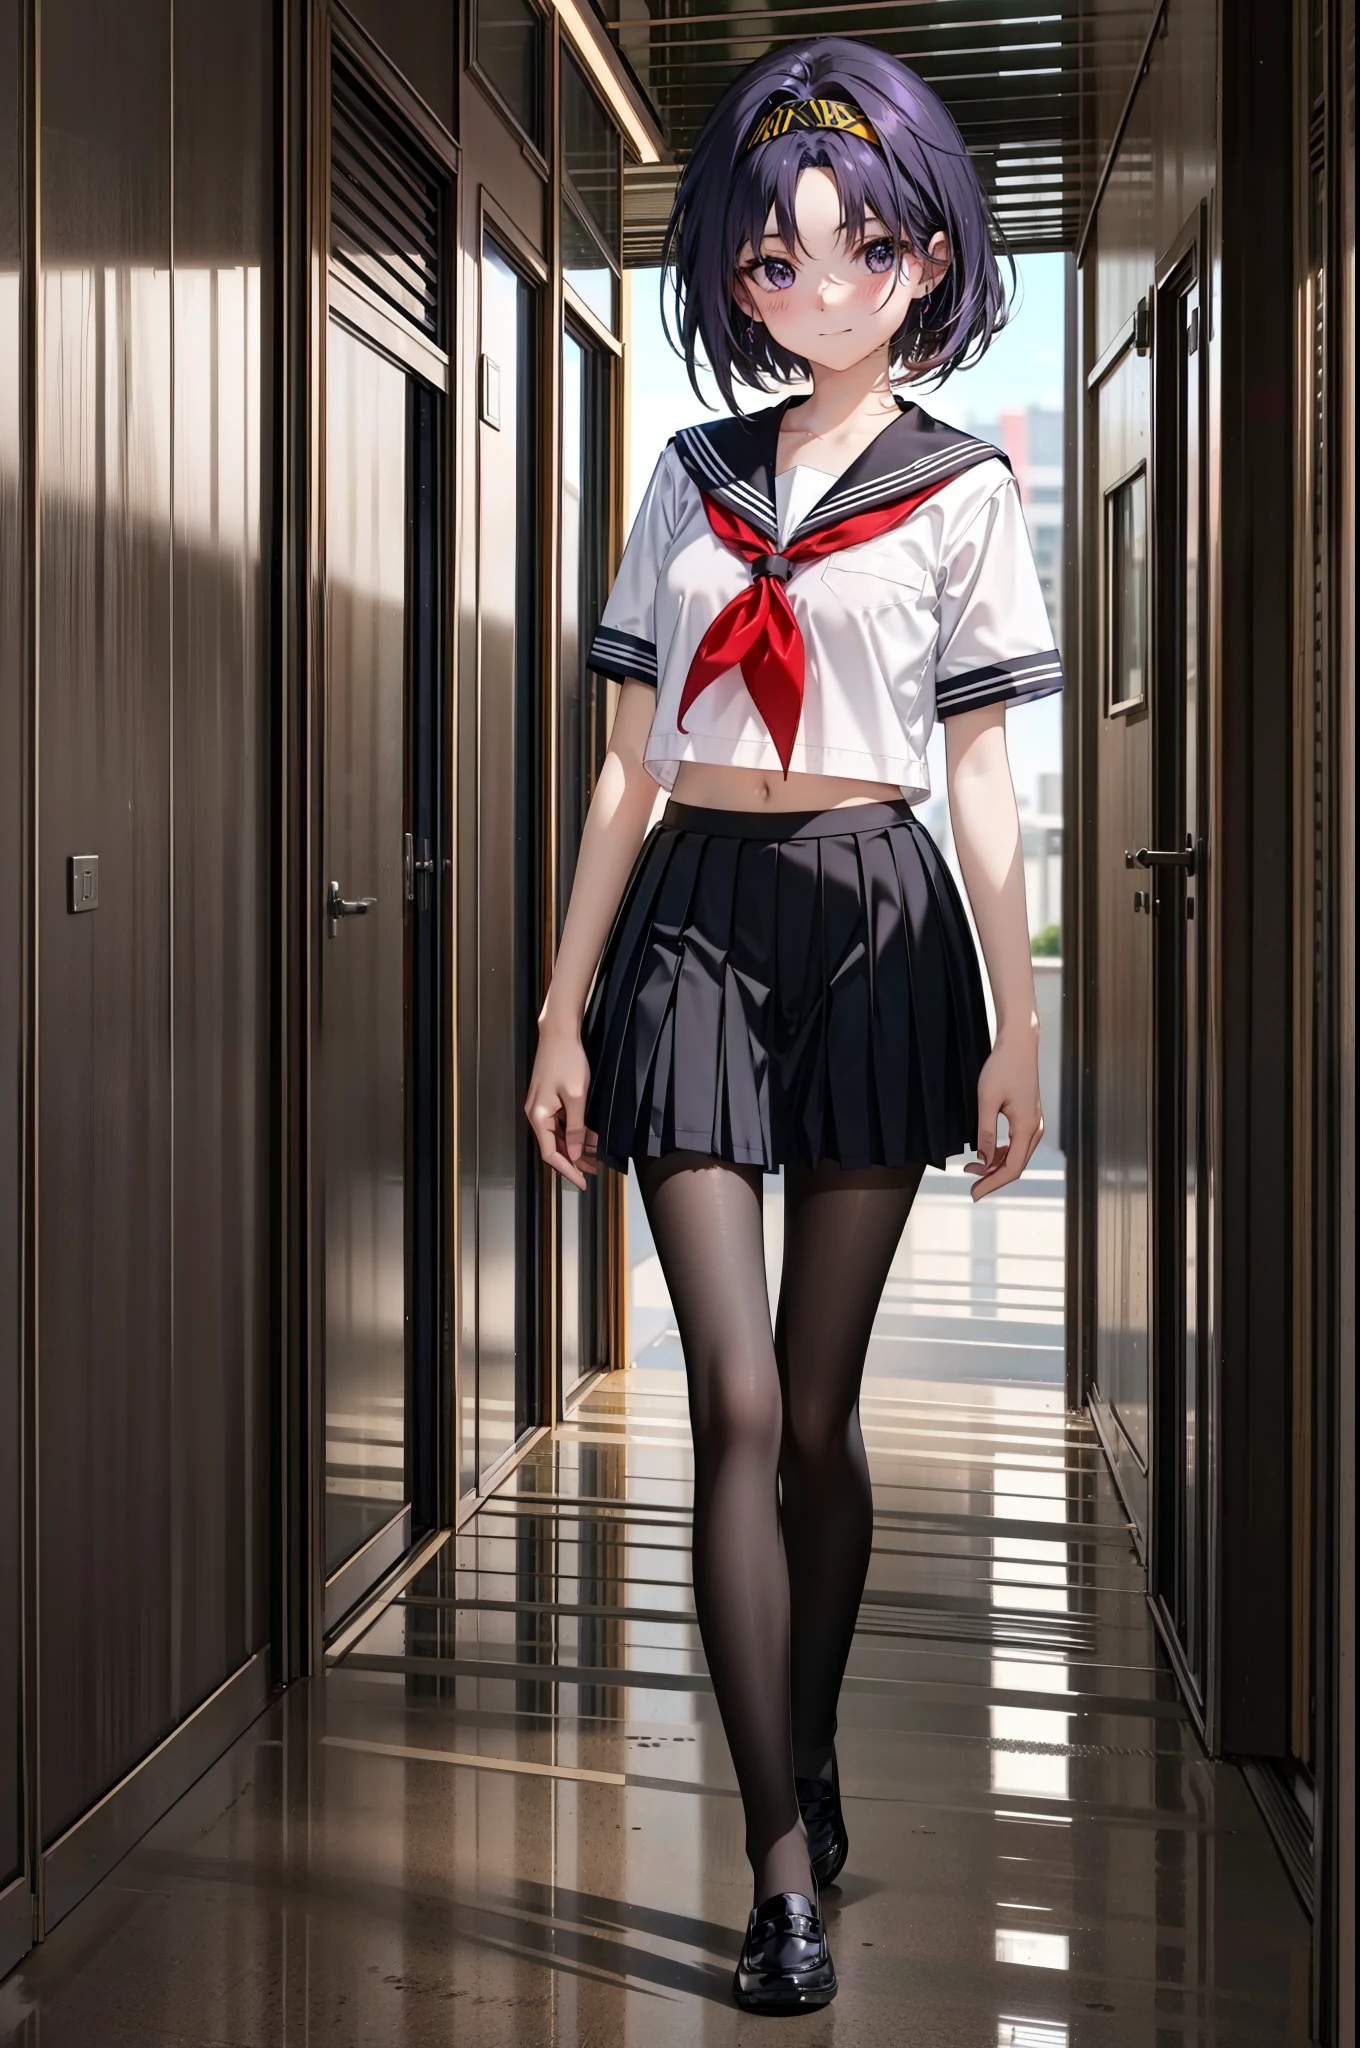 yuukikonno, Yuki Konno,Black Hair,short hair,Bob Hair ,Green headband,(iris:1.5), (Small breasts:1.2), smile,Japanese schoolgirl(Black Sailor Suit),Short sleeve,Black pleated skirt,Black pantyhose,Brown Loafers,whole bodyがイラストに入るように,walk,
break outdoors,  city,construction area,
break looking at viewer, whole body,
break (masterpiece:1.2), highest quality, High resolution, unity 8k wallpaper, (shape:0.8), (Beautiful details:1.6), Highly detailed face, Perfect lighting, Extremely detailed CG, (Perfect hands, Perfect Anatomy),